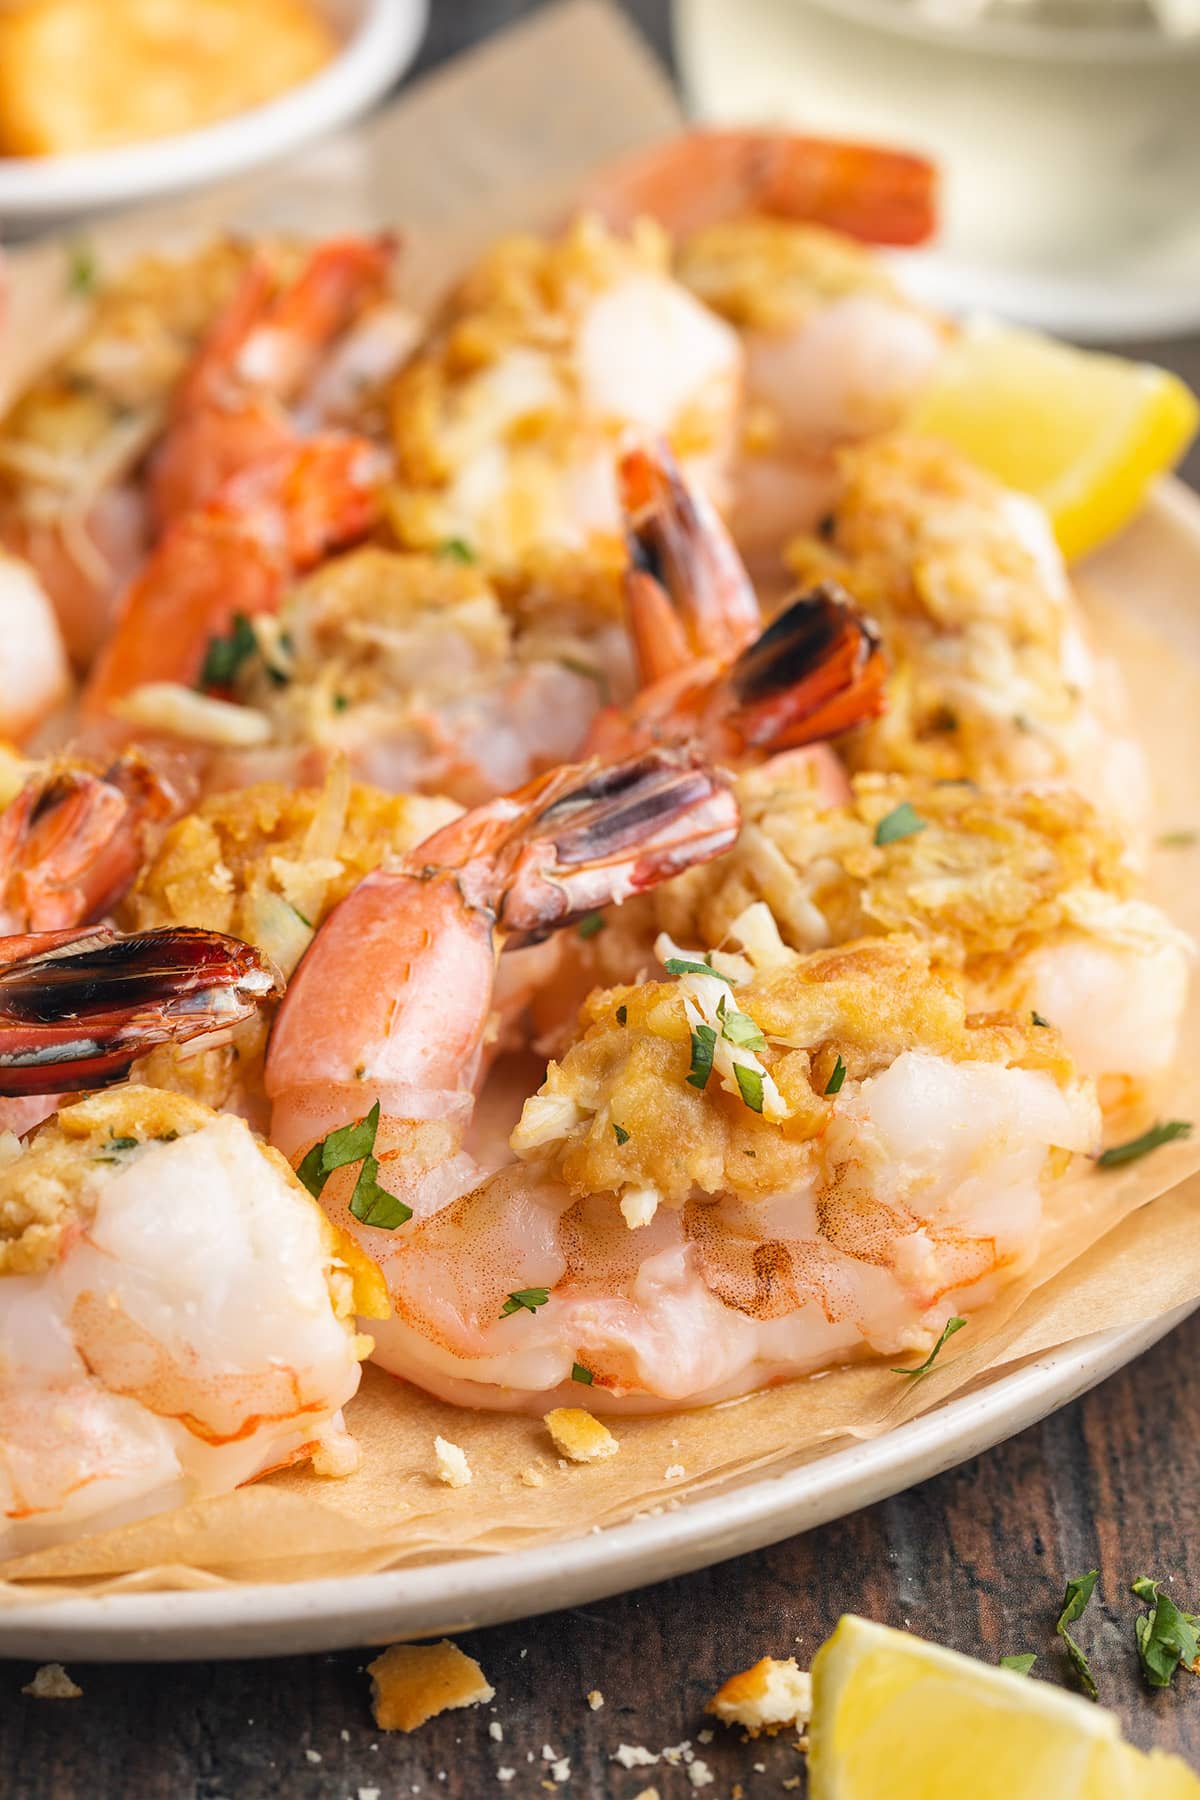 A plate of baked, stuffed shrimp with lemon wedges.